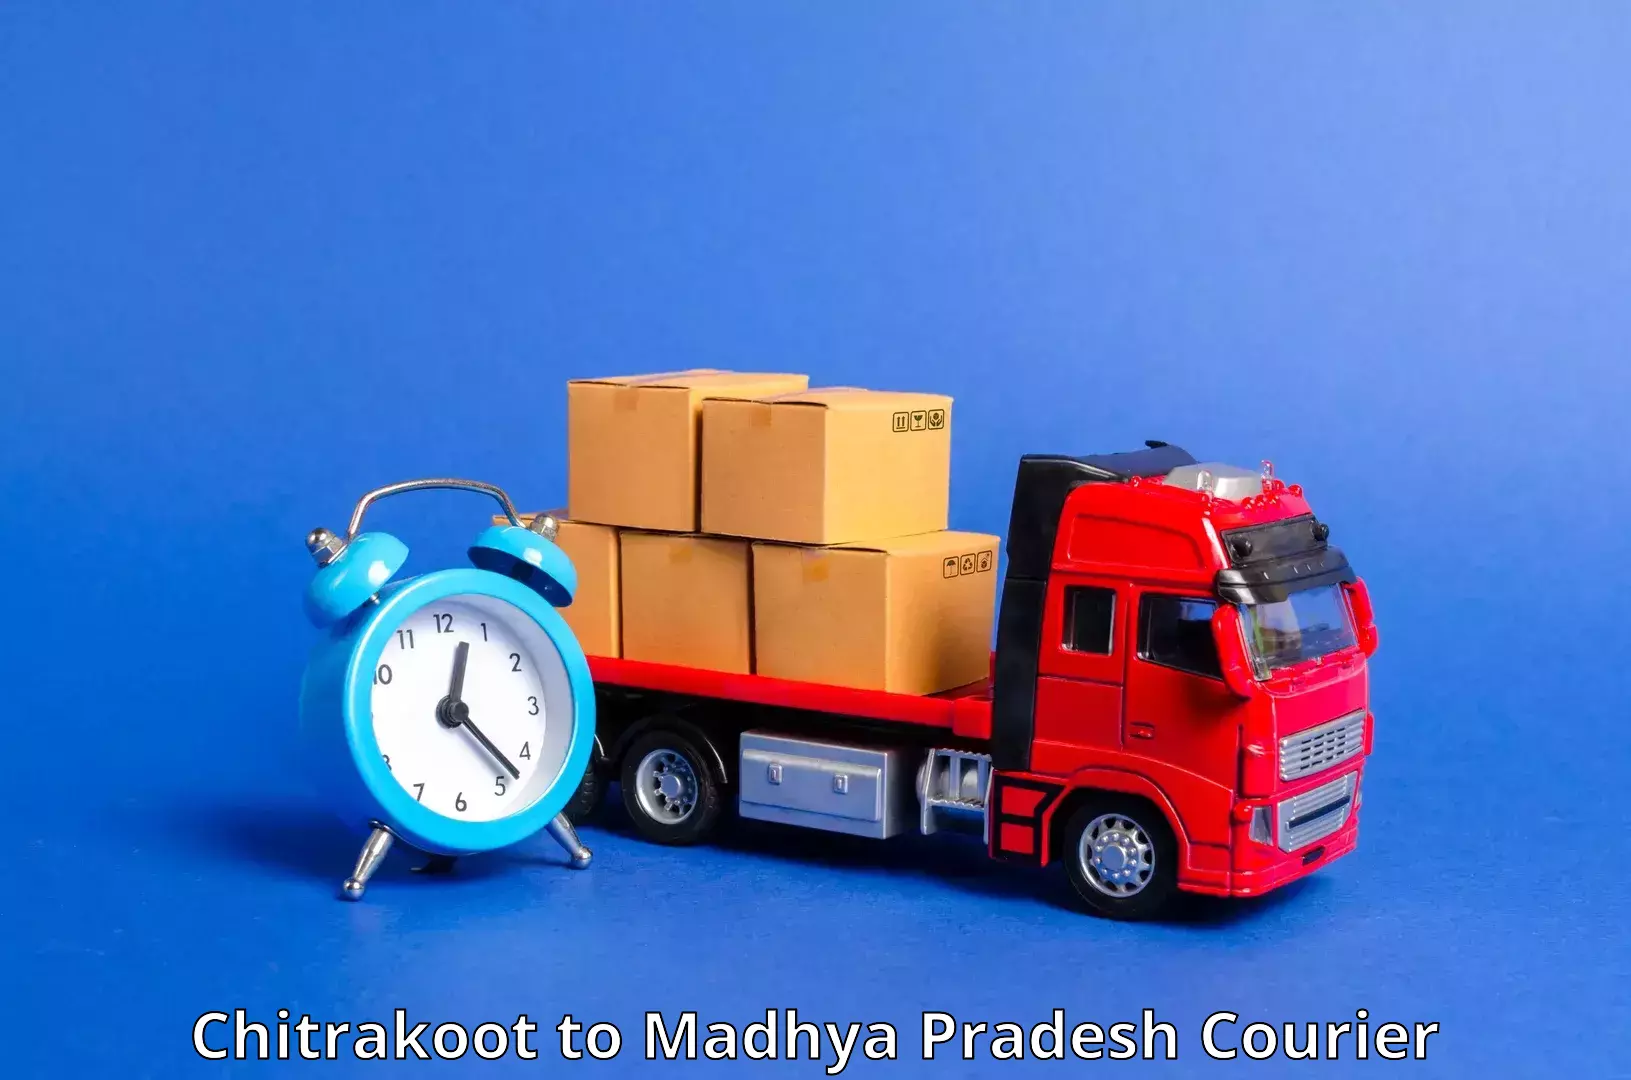 Global courier networks Chitrakoot to Dewas